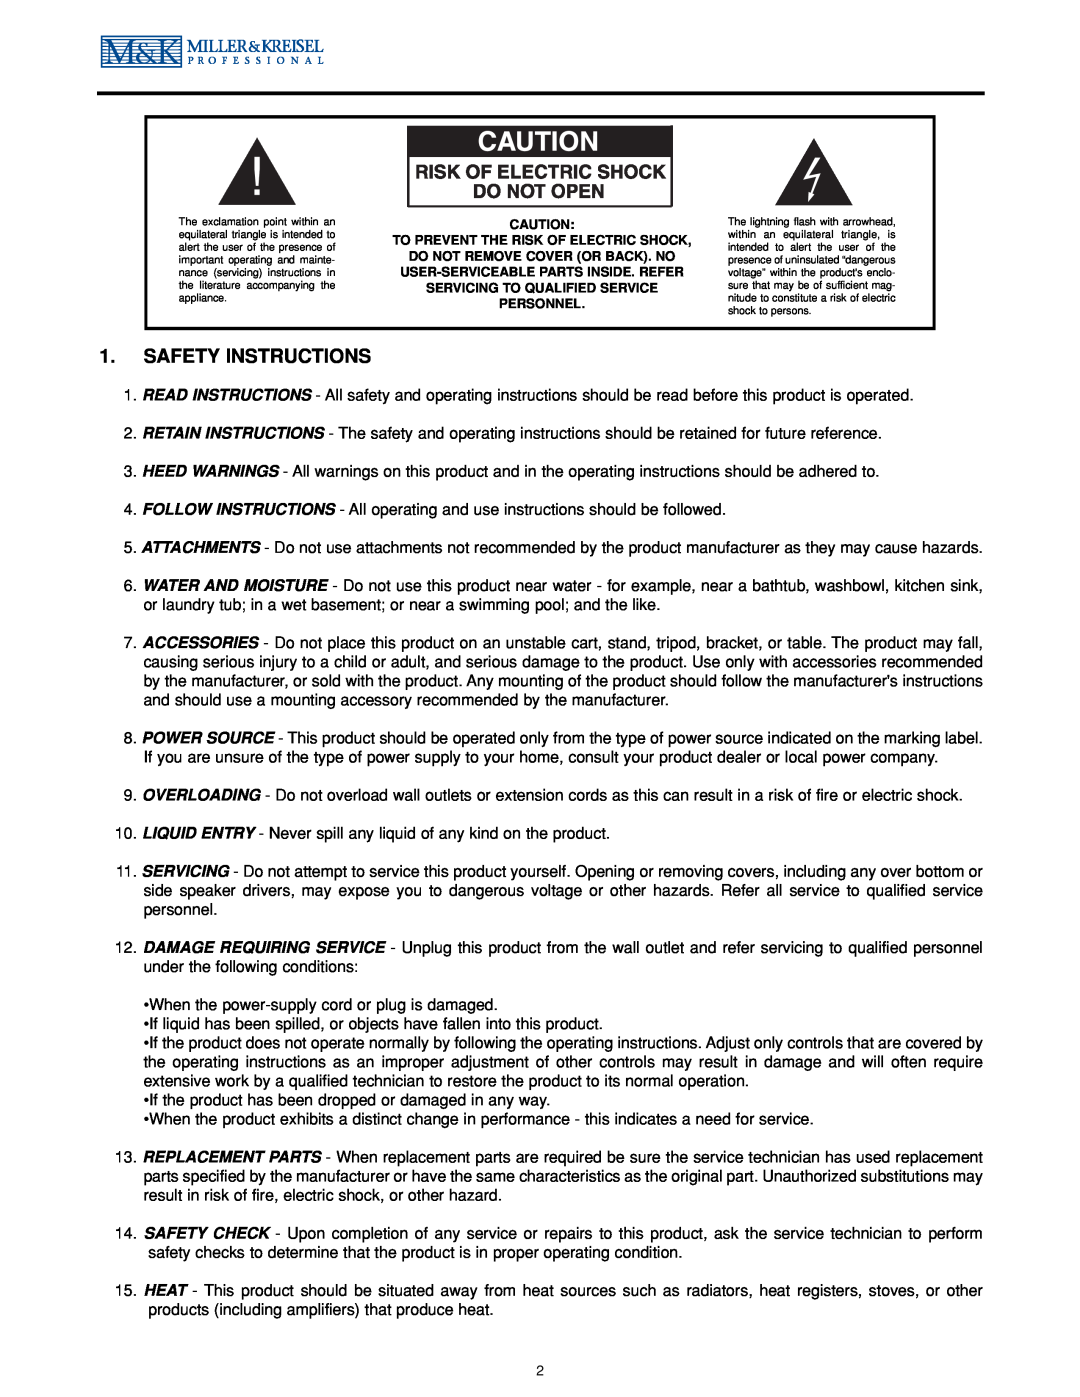 MK Sound MPS-1611P operation manual Safety Instructions 